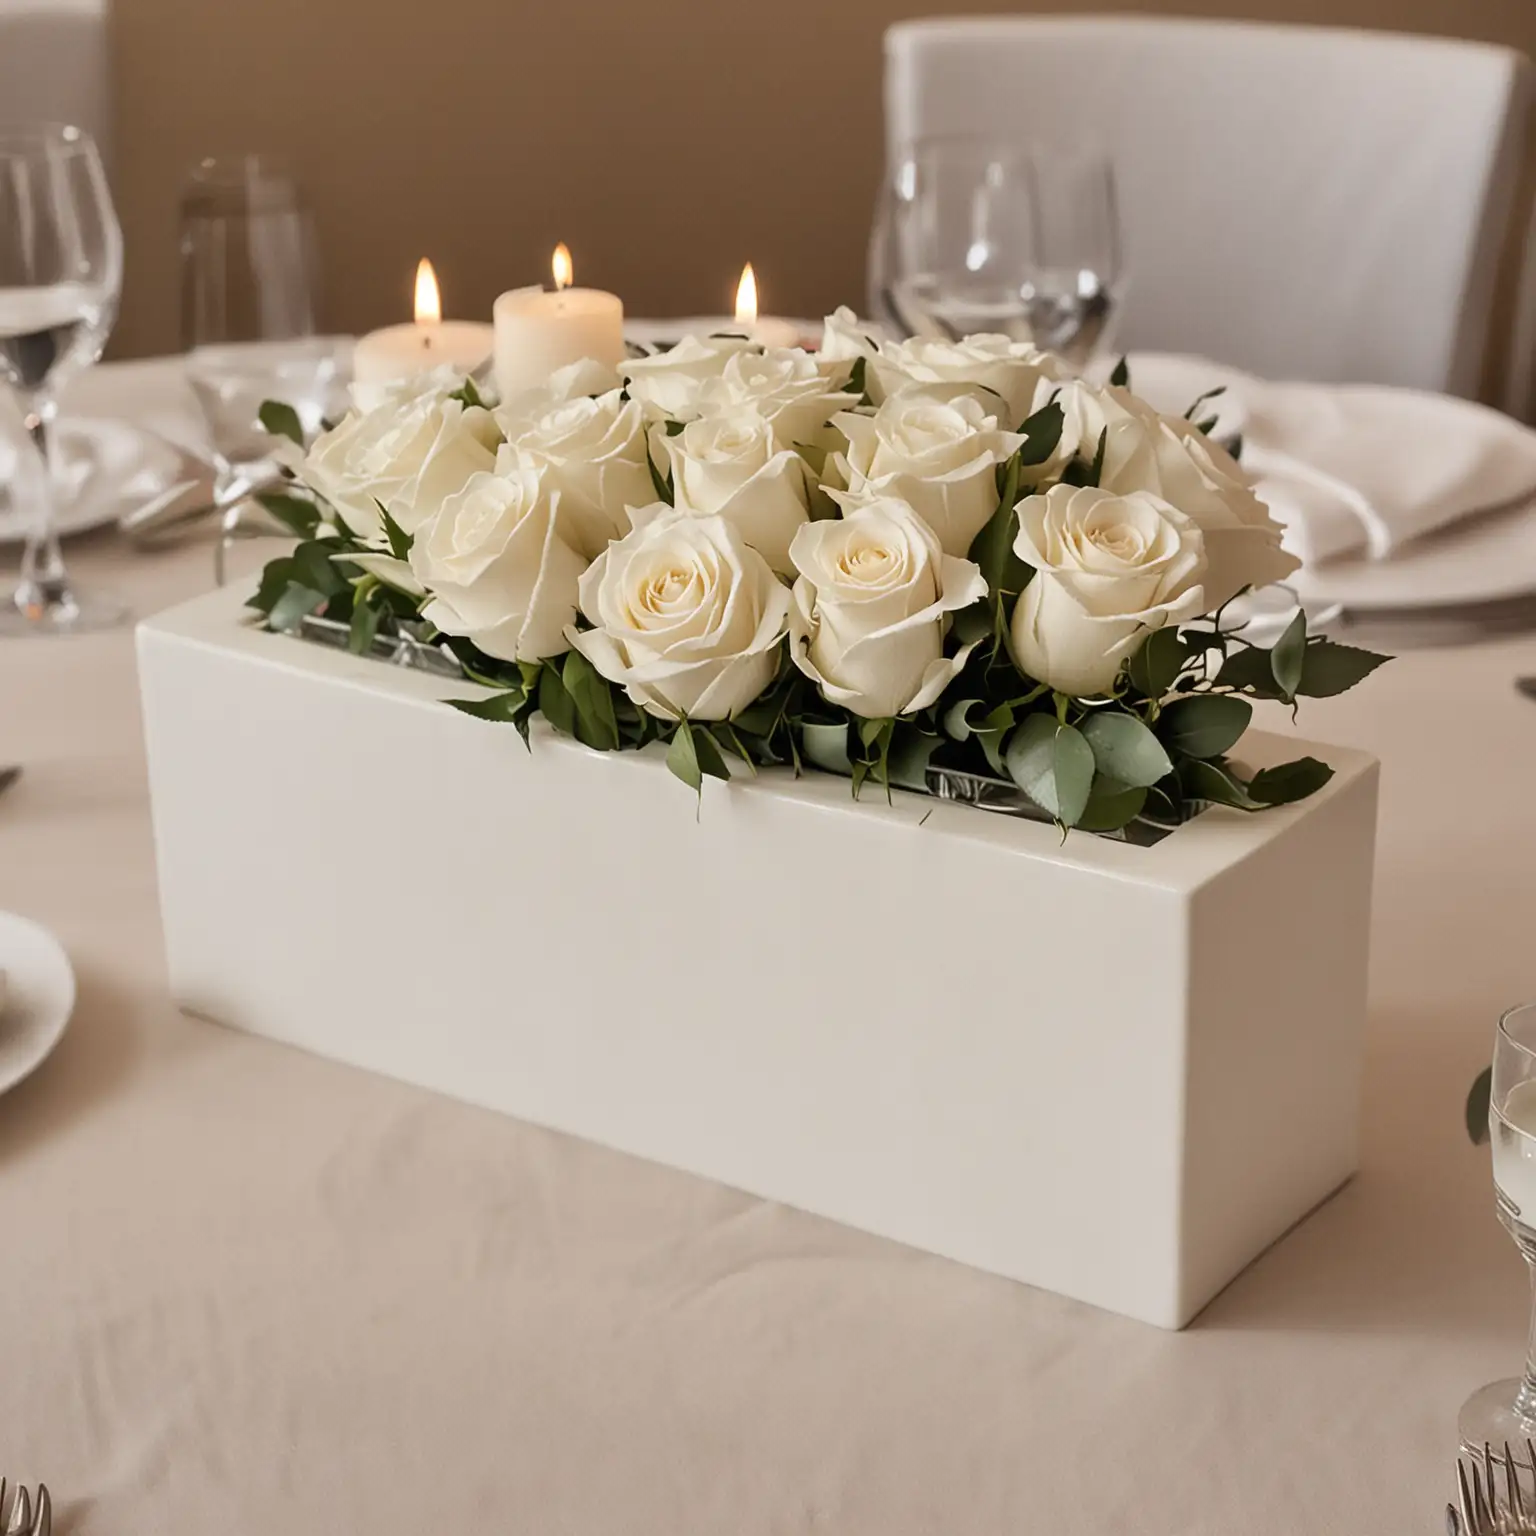 Modern-White-Rose-Wedding-Centerpiece-with-Candle